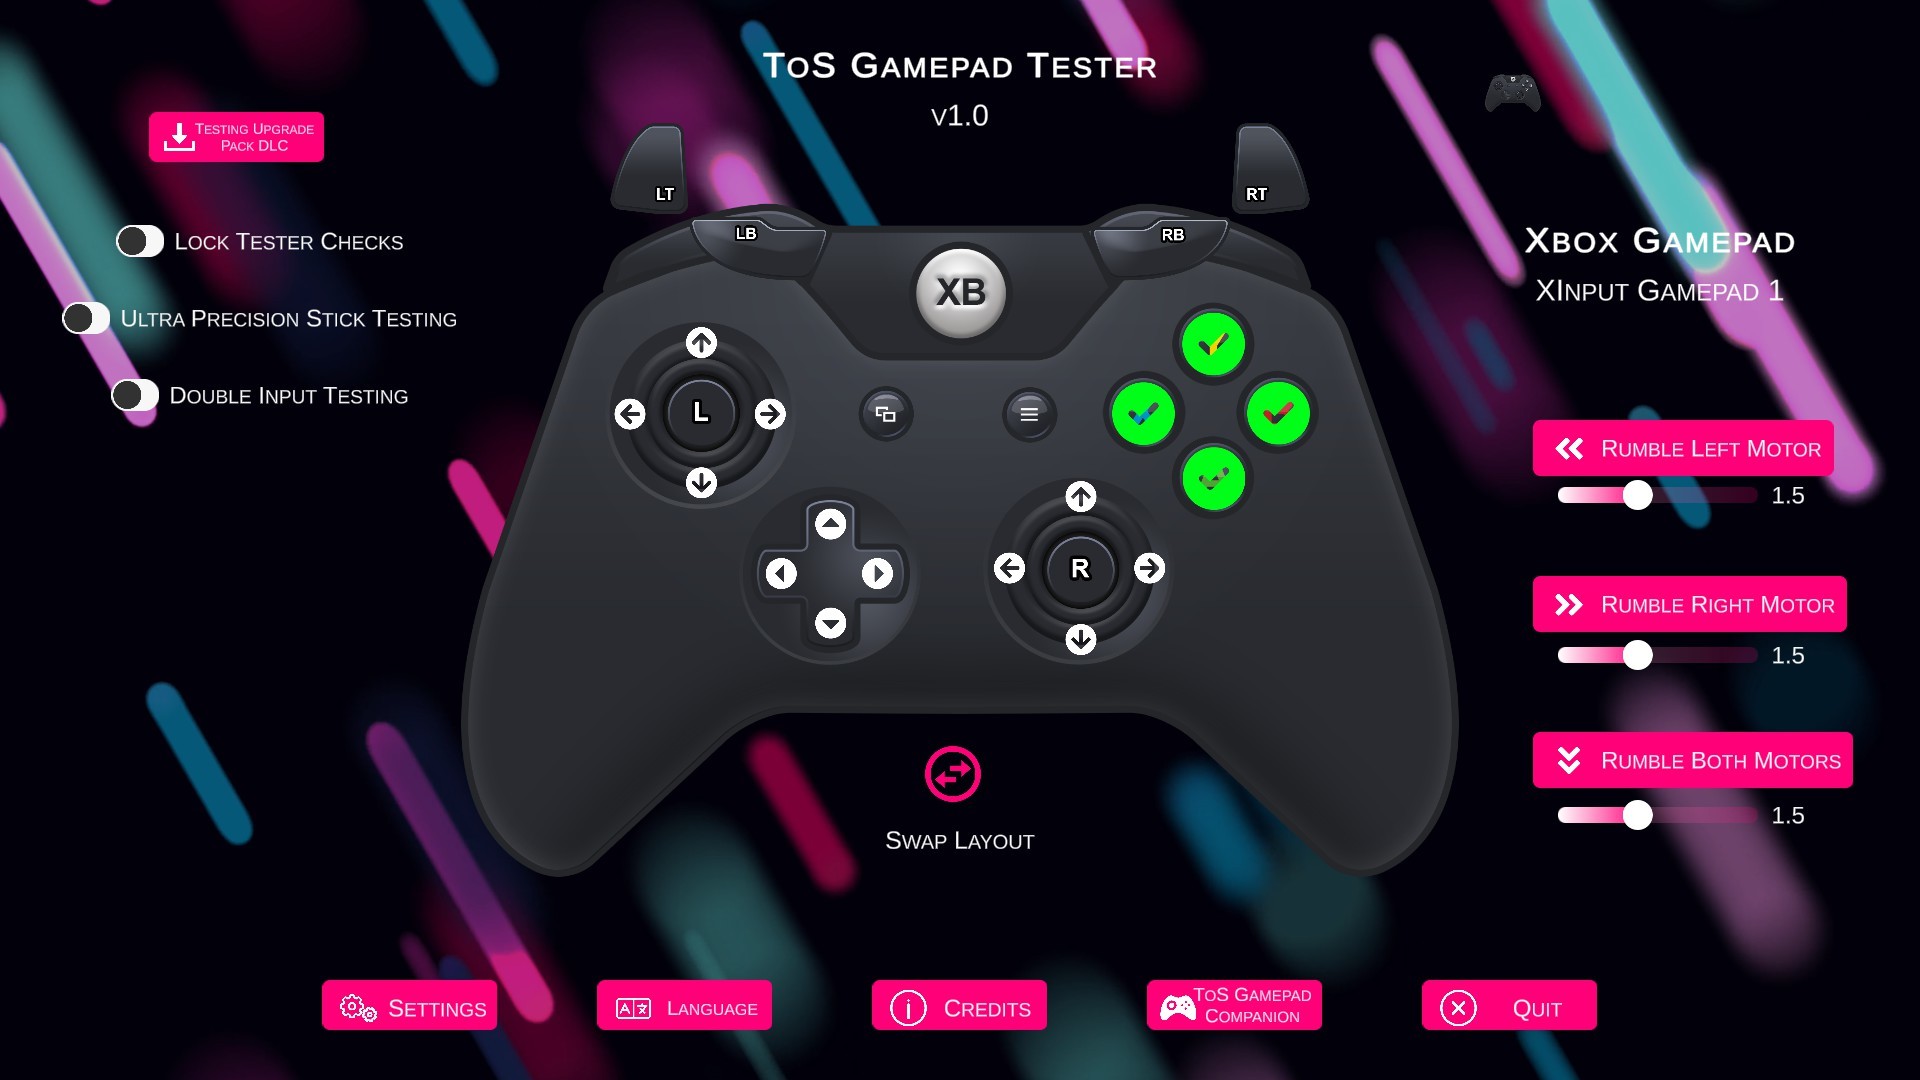 ToS Gamepad Tester on Steam